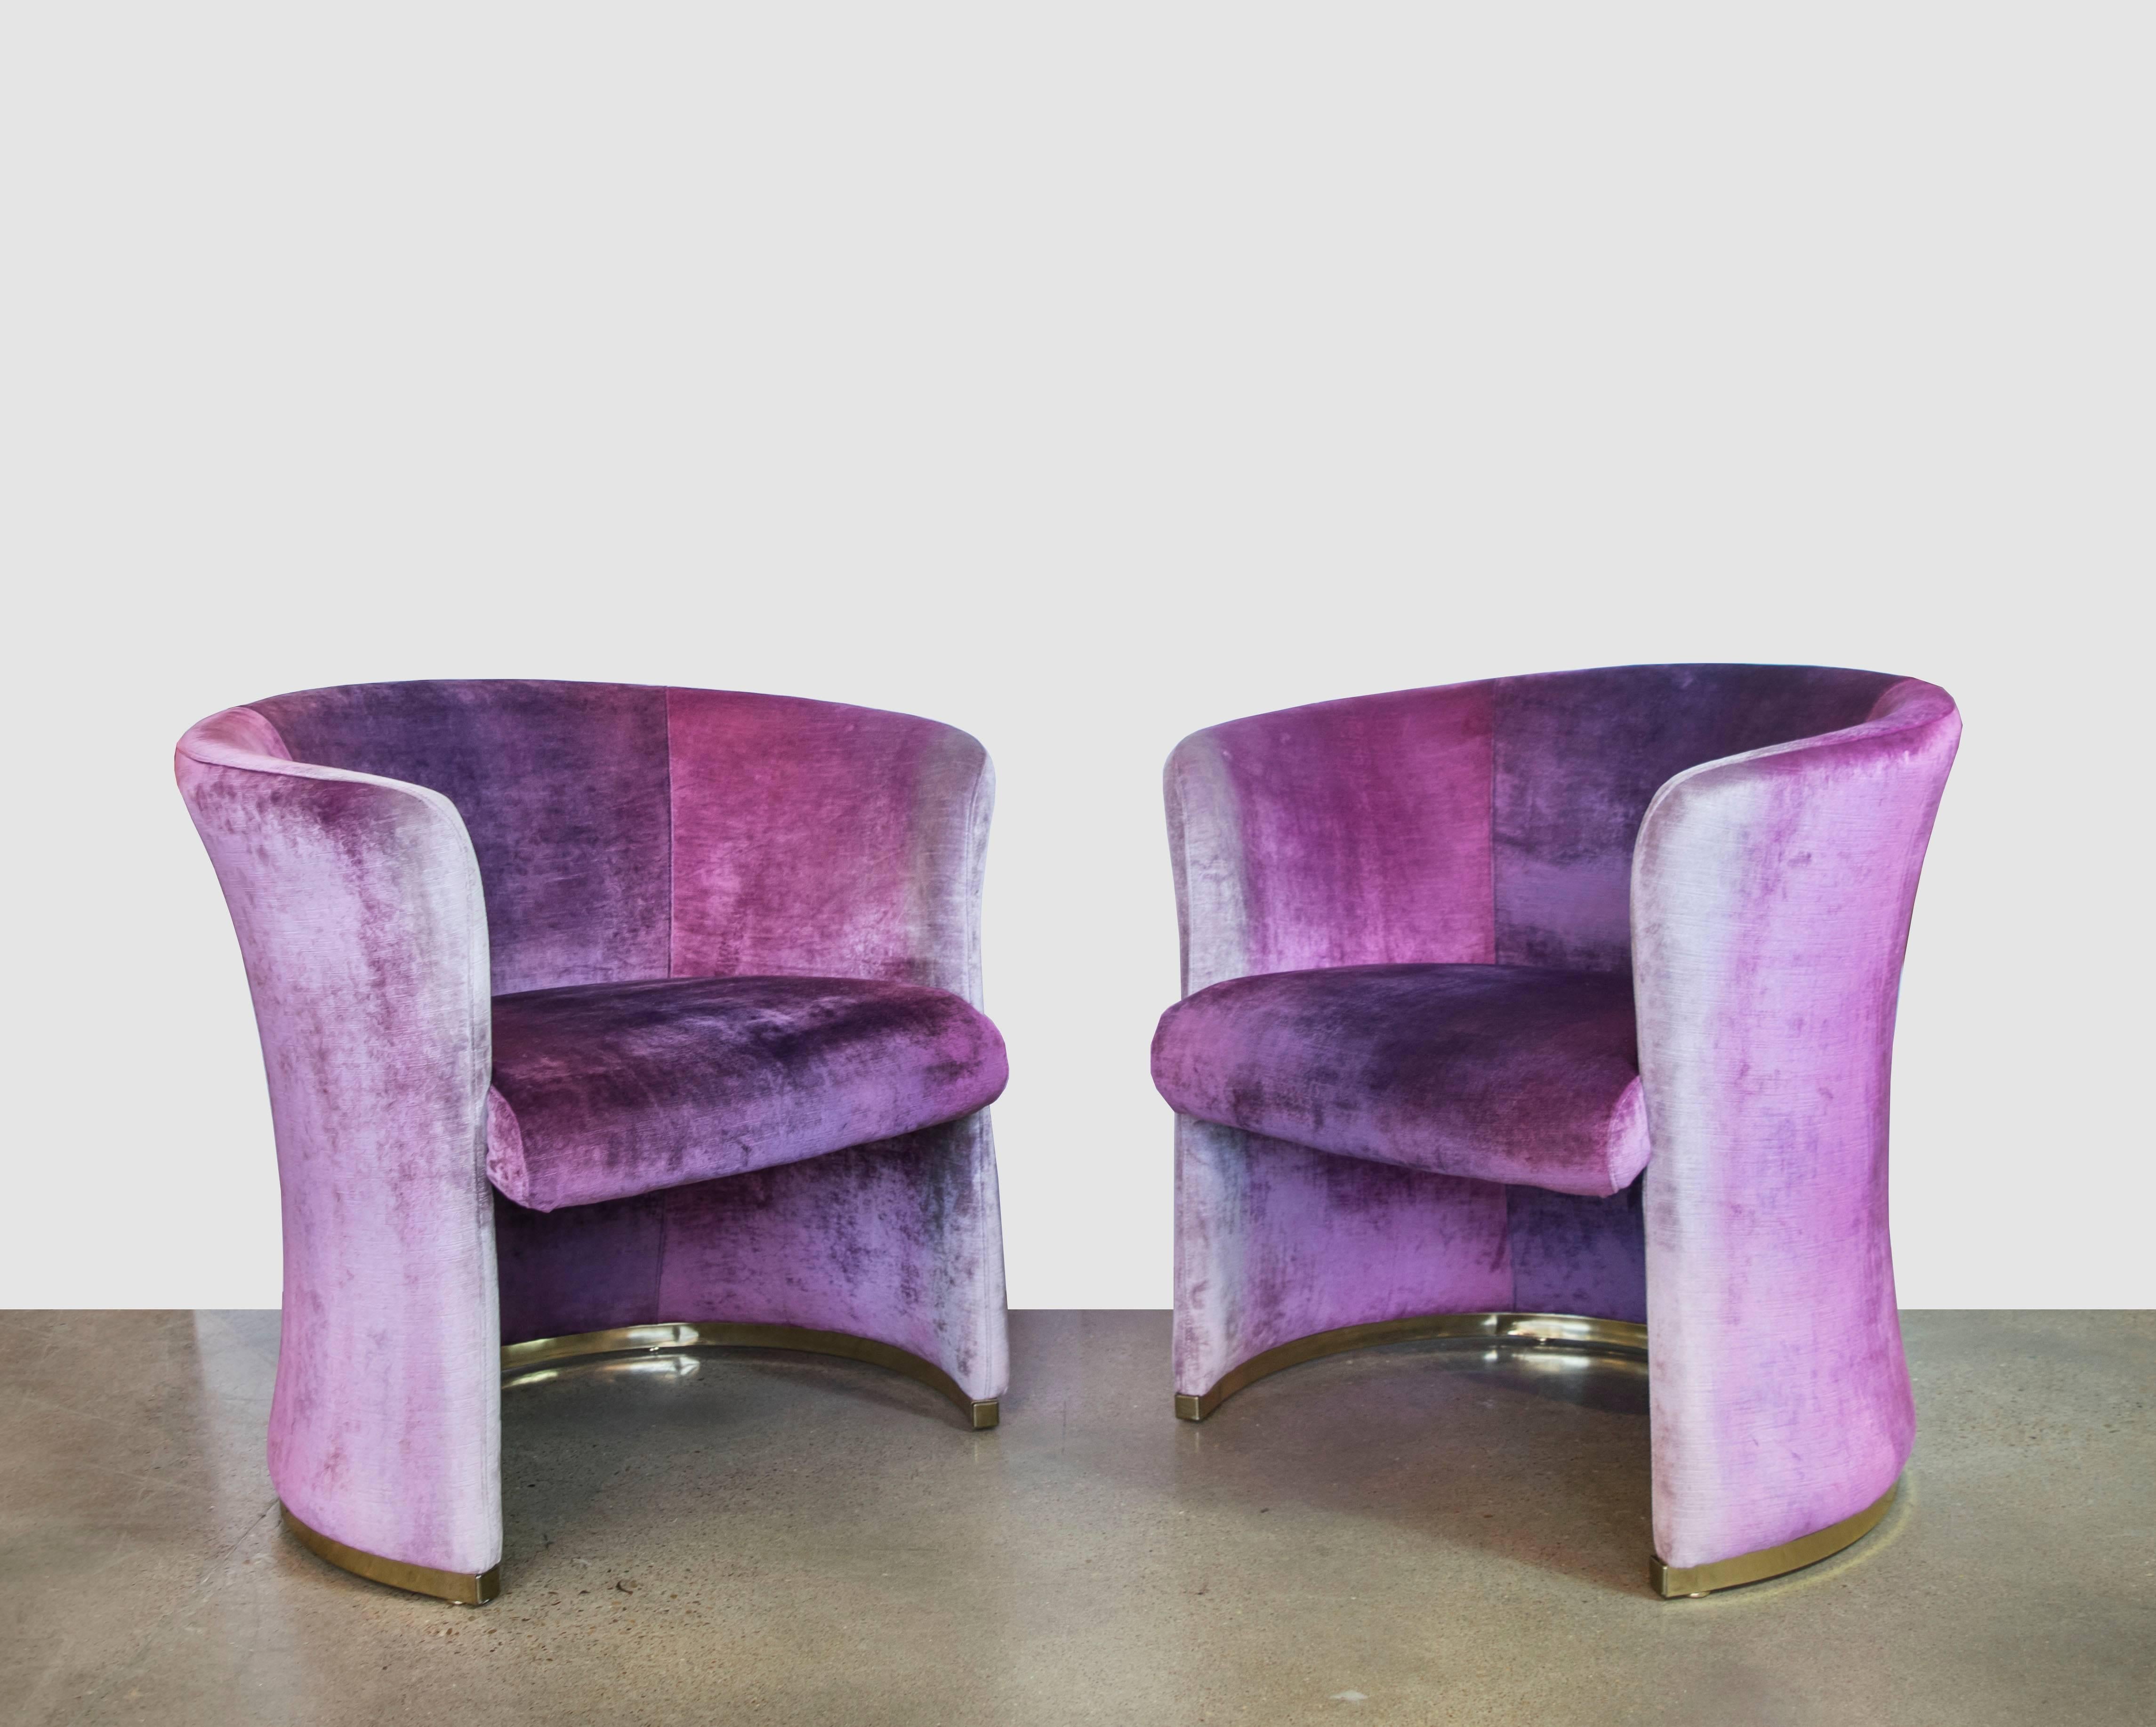 Pair of Milo Baughman for Thayer Coggin barrel club chairs with curved backs and exquisite ombre luxurious velvet which goes from a very pale lavender to a darker magenta. The chairs were expertly reupholstered and sit on a thin brass base.